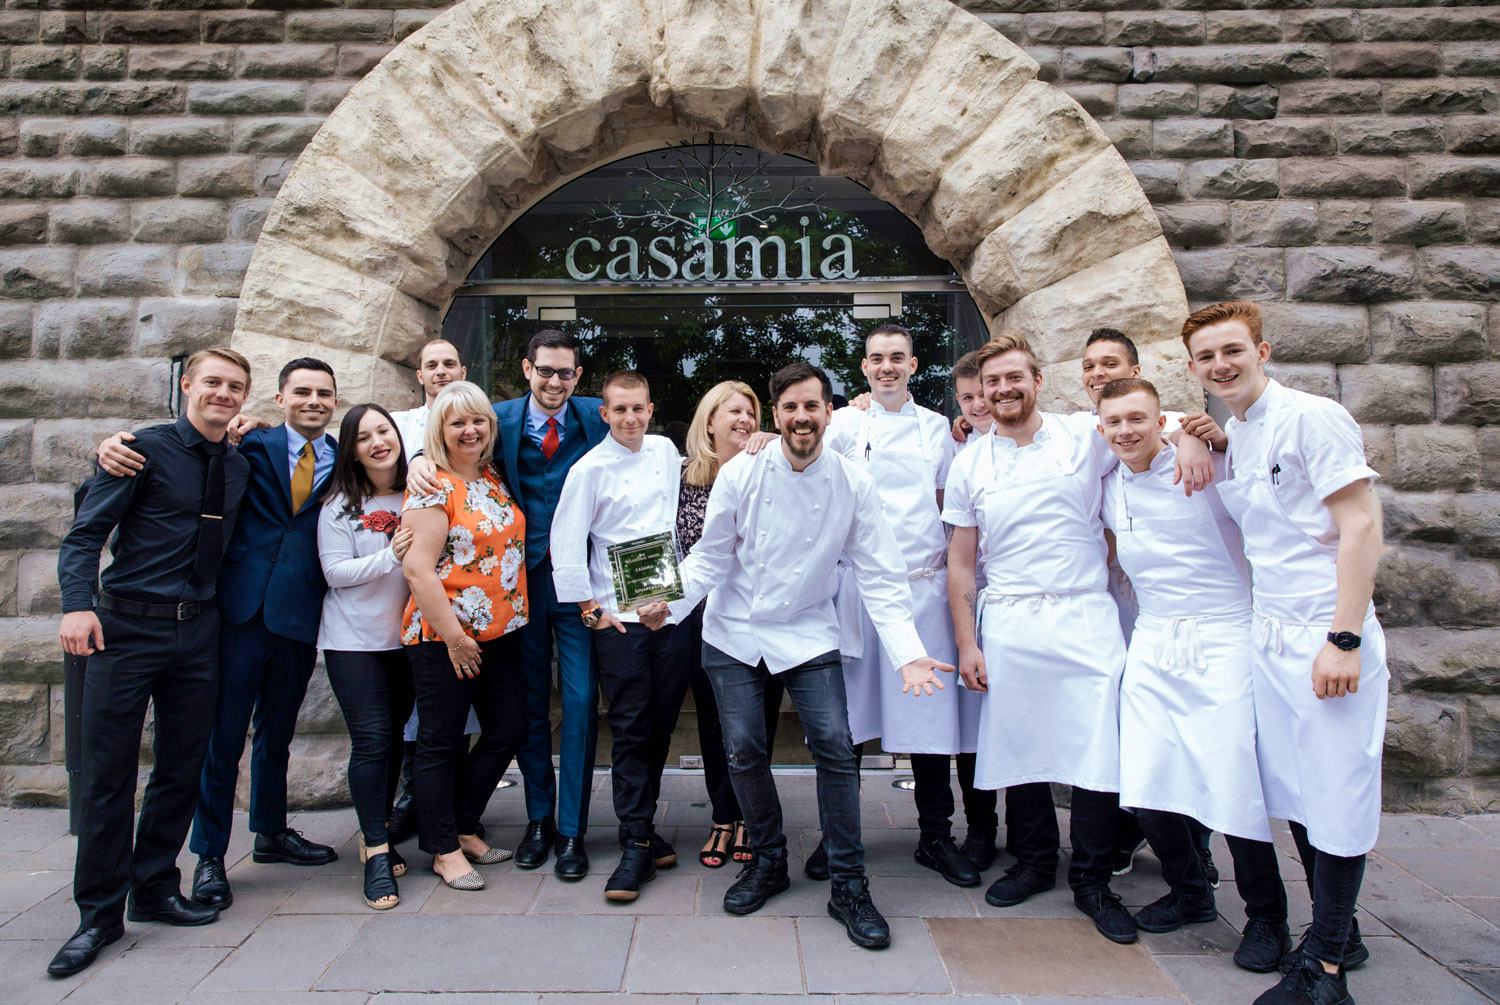 Casamia Bristol Peter Sanchez Iglesias with team outside restaurant with award